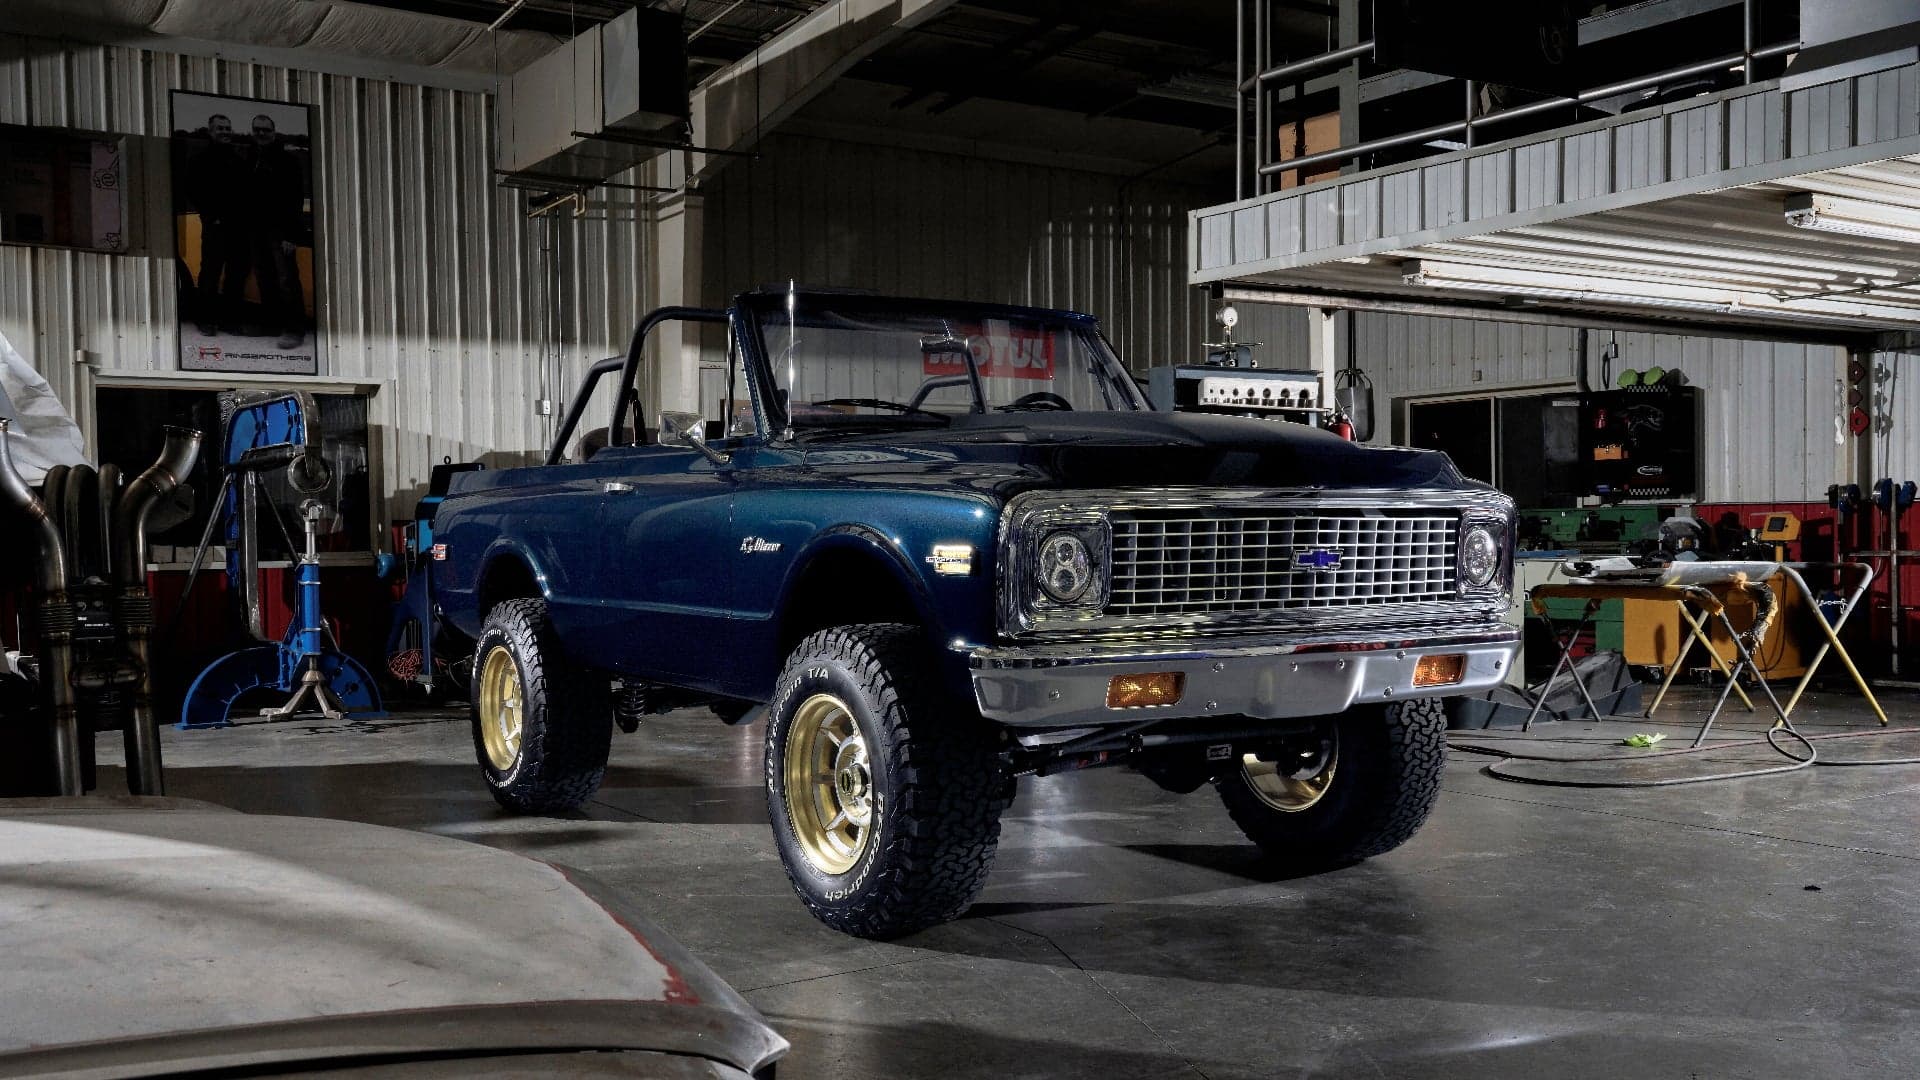 The Ringbrothers’ 430-HP Chevy K5 Blazer Restomod Was Built Especially for Rapper Future